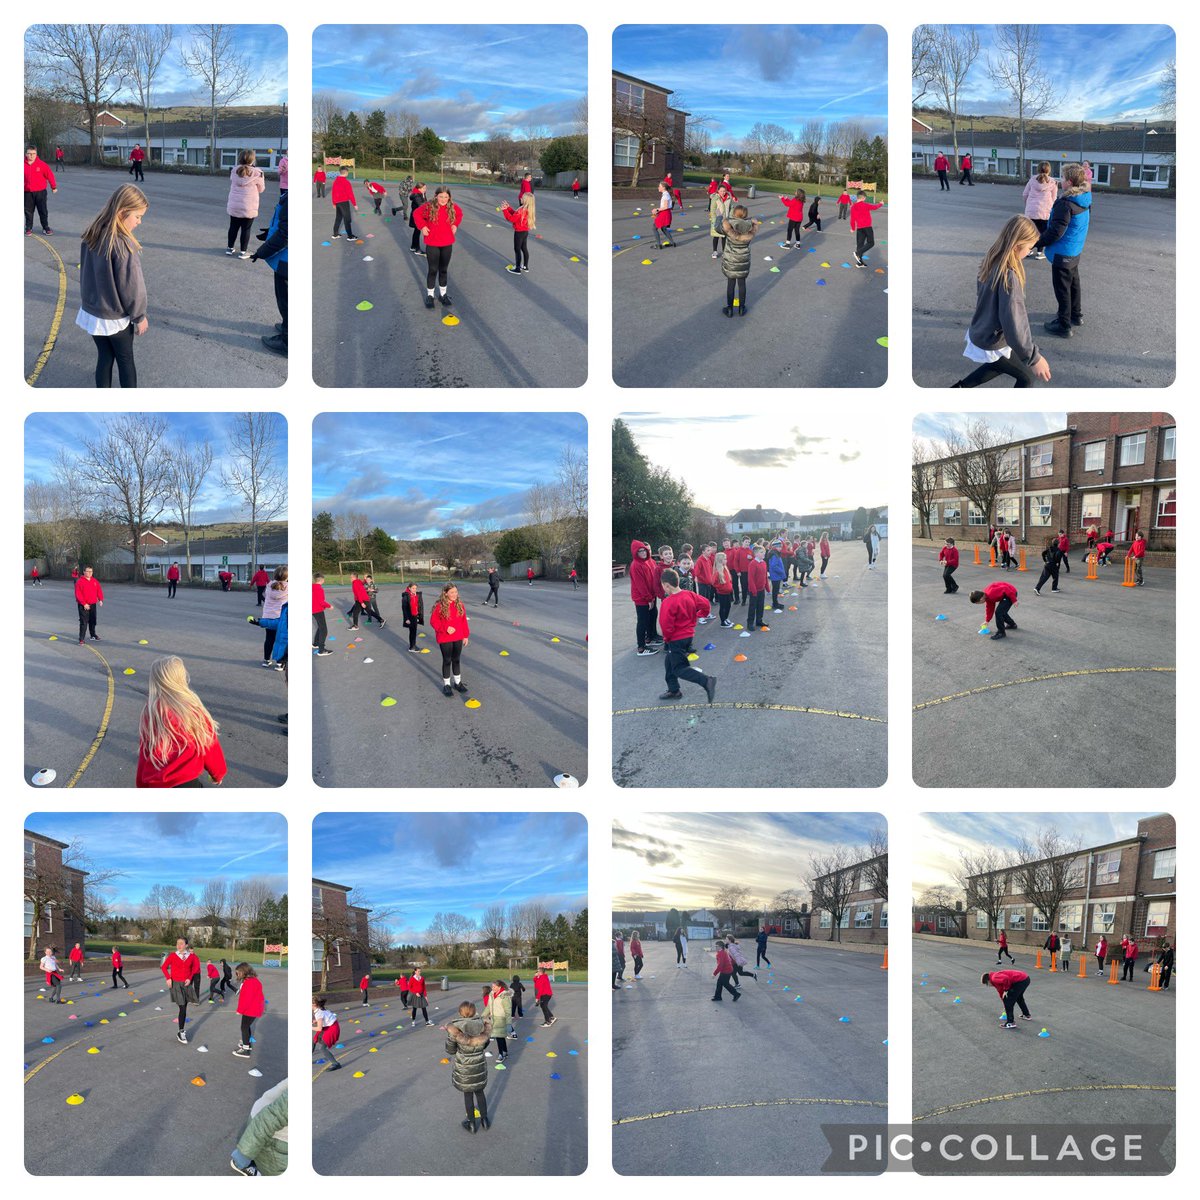 Great to have @LucyKingCWDO in school 🏫 today to help us become healthy and confident individuals! As you can see the pupils loved playing cricket 🏏 and doing drills! @GlyncoedP @GPSMrsLCook @CricketWales #GPSREACH